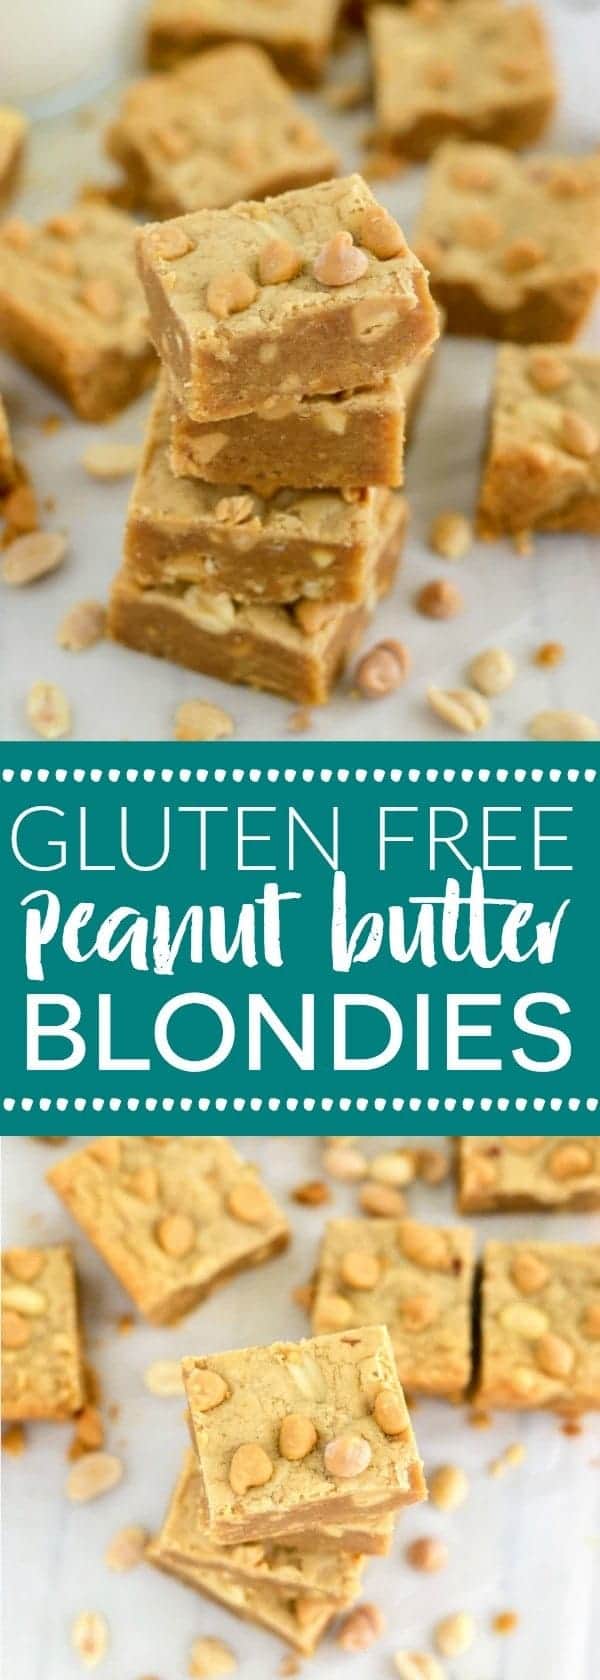 Gluten Free Peanut Butter Blondies (with dairy free option) packed full of flavor from peanuts 3 ways. Recipe from @whattheforkblog | whattheforkfoodblog.com | Sponsored by Naturally More